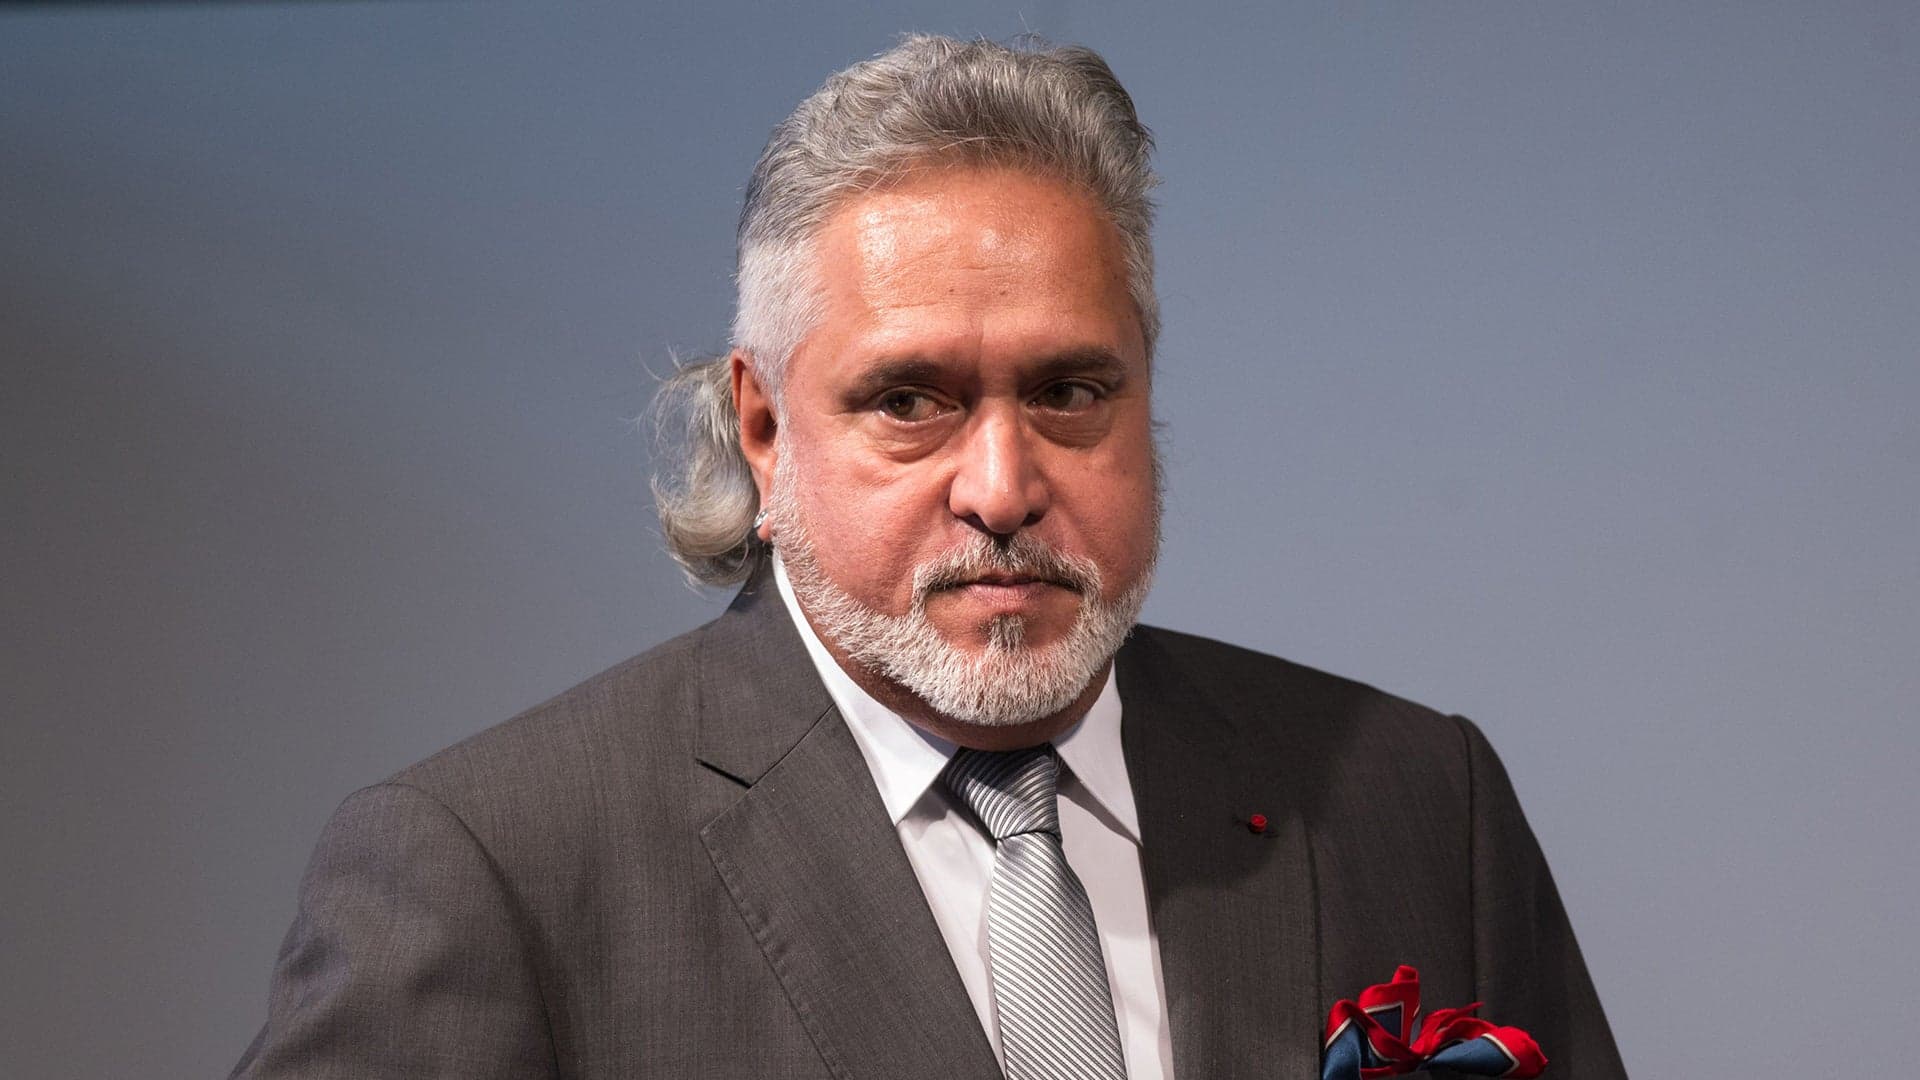 Former Force India F1 Team Owner Vijay Mallya to Be Extradited to India, UK Court Approves